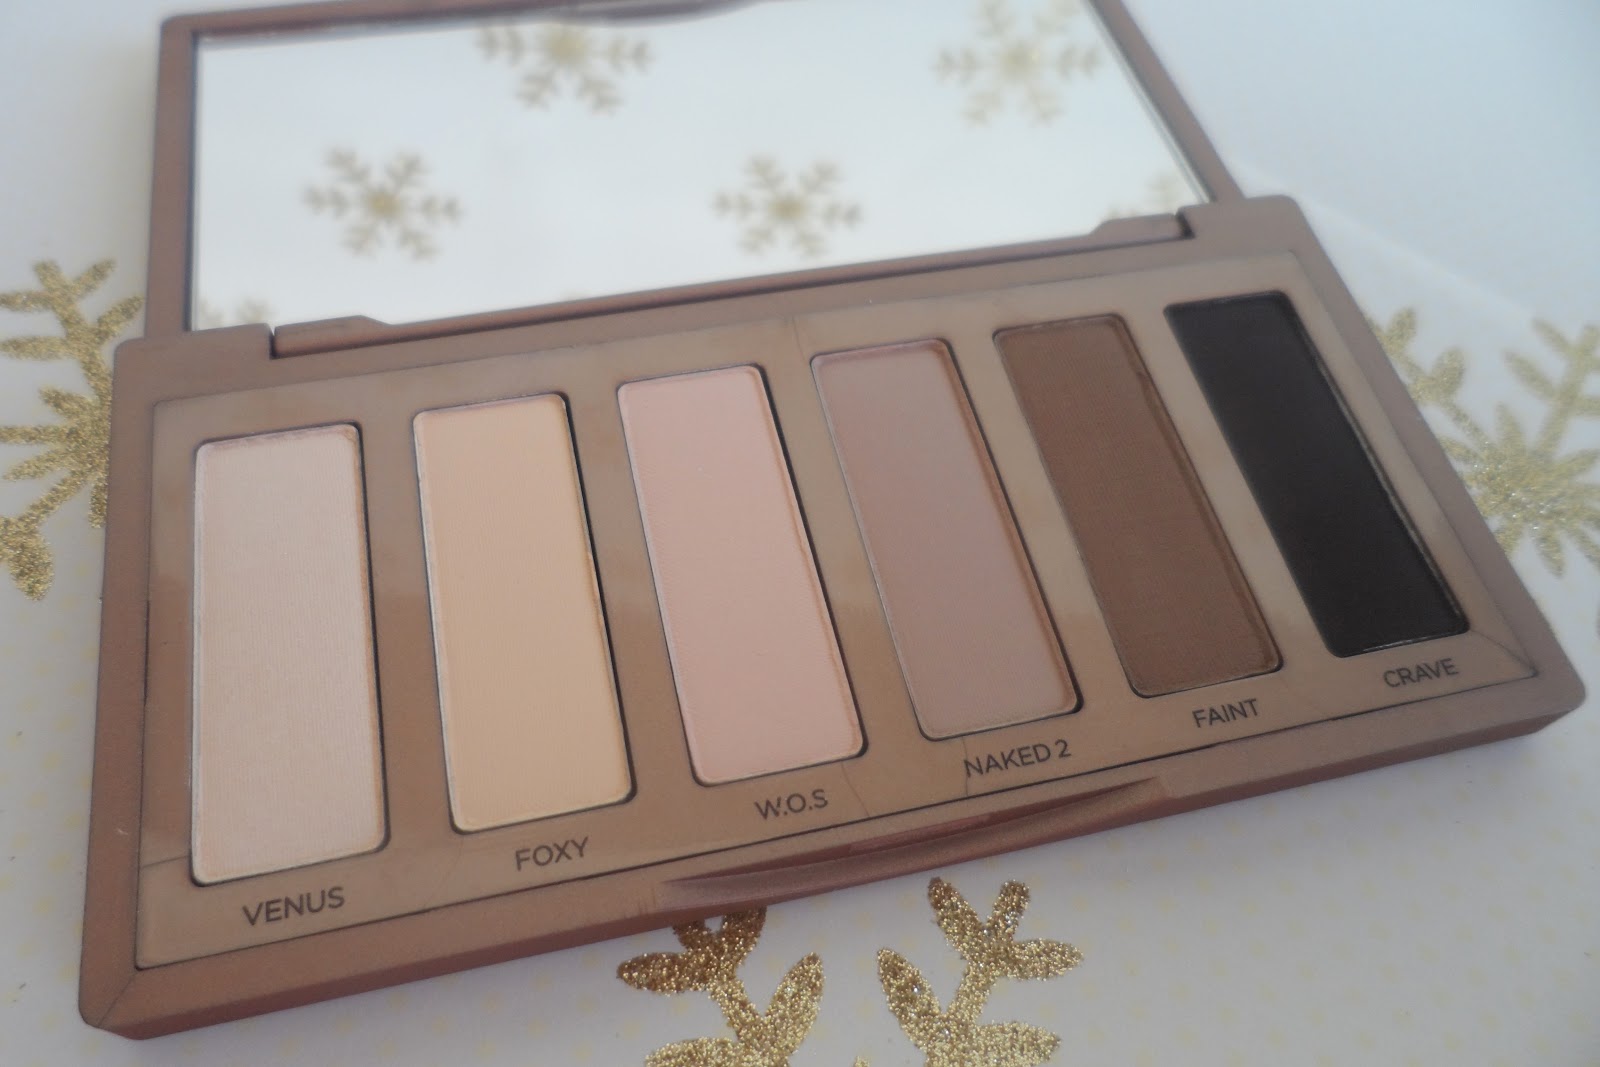 URBAN DECAY | Naked 2 Basics Palette - Review + Swatches 